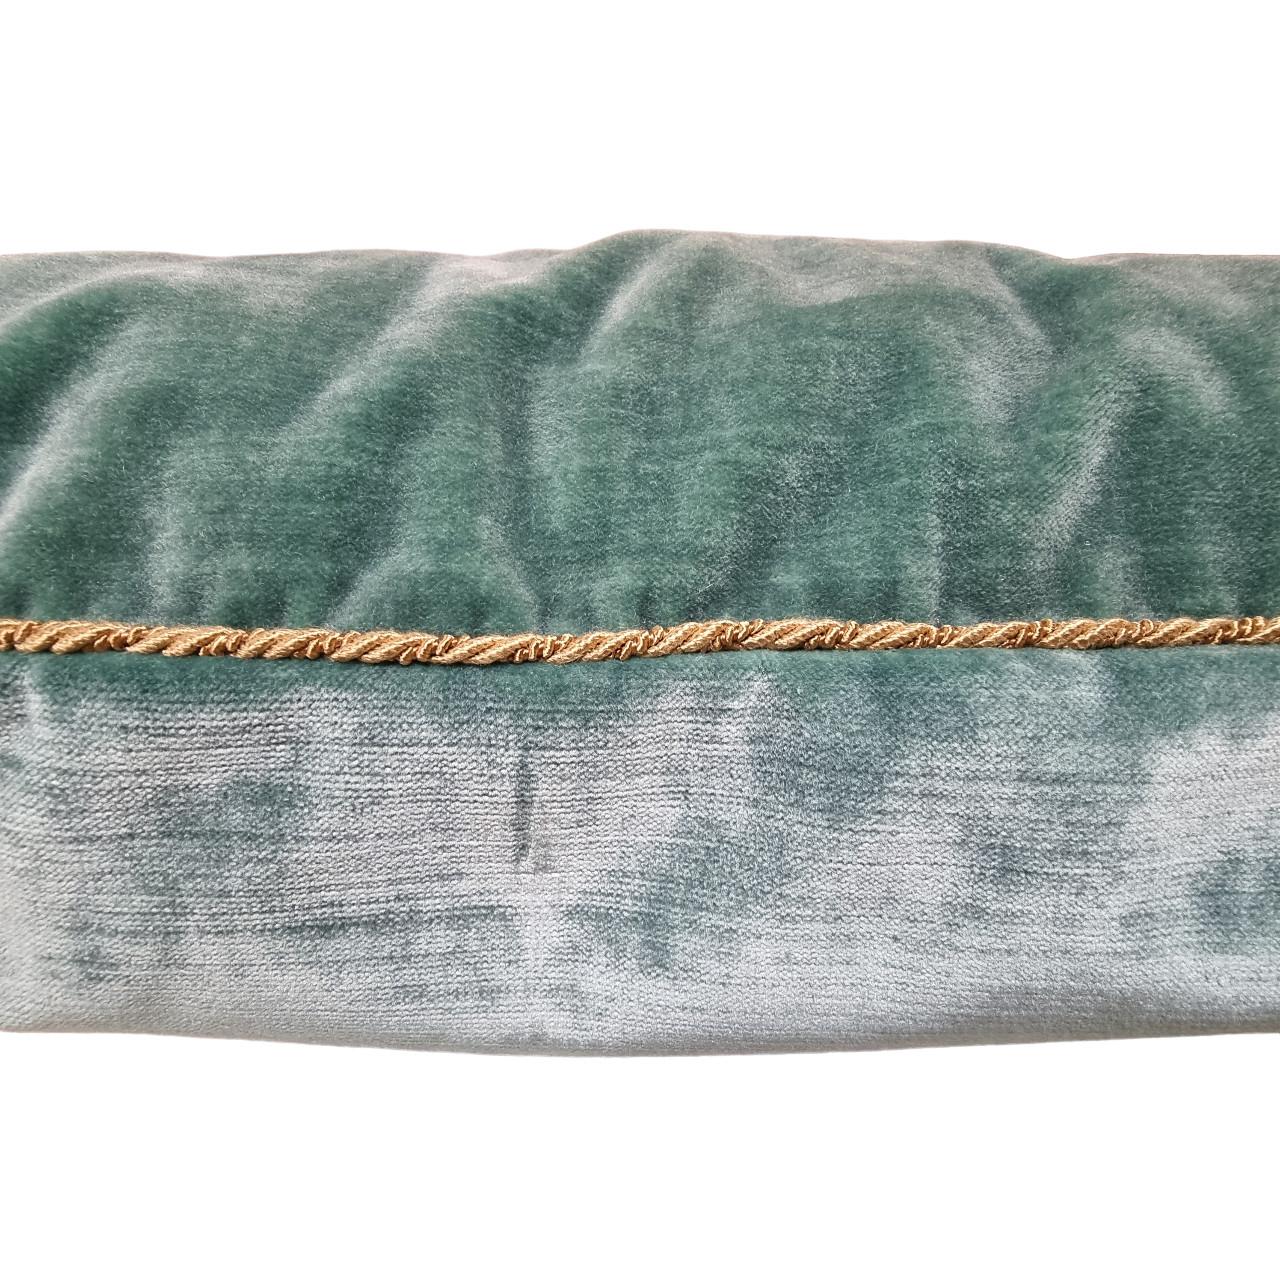 Hand-Crafted Embroidered Aqua Velvet Throw Pillow with Tassels For Sale